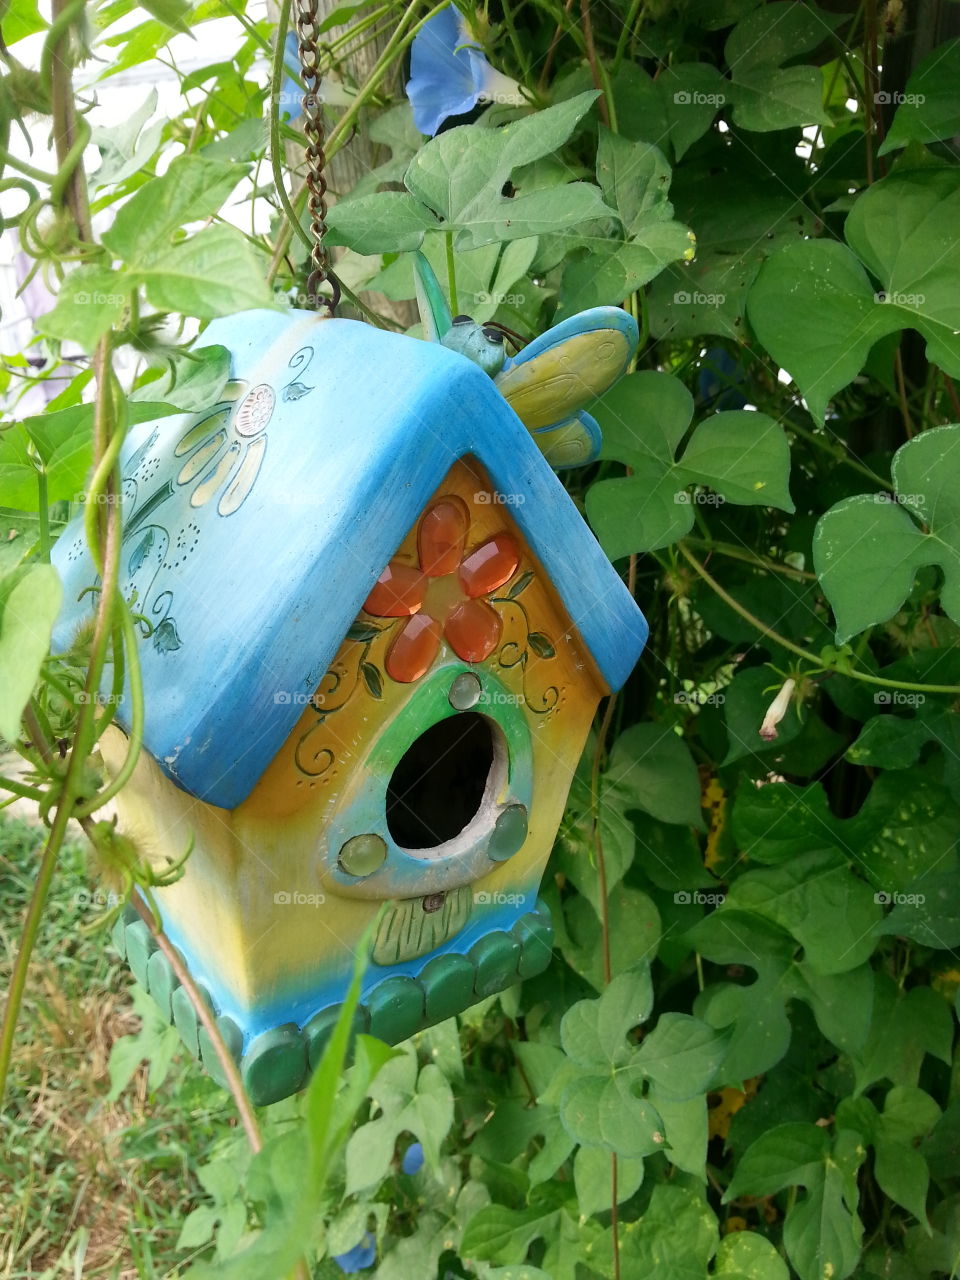 Pretty bird house. Bird house surrounded by Morning Glories